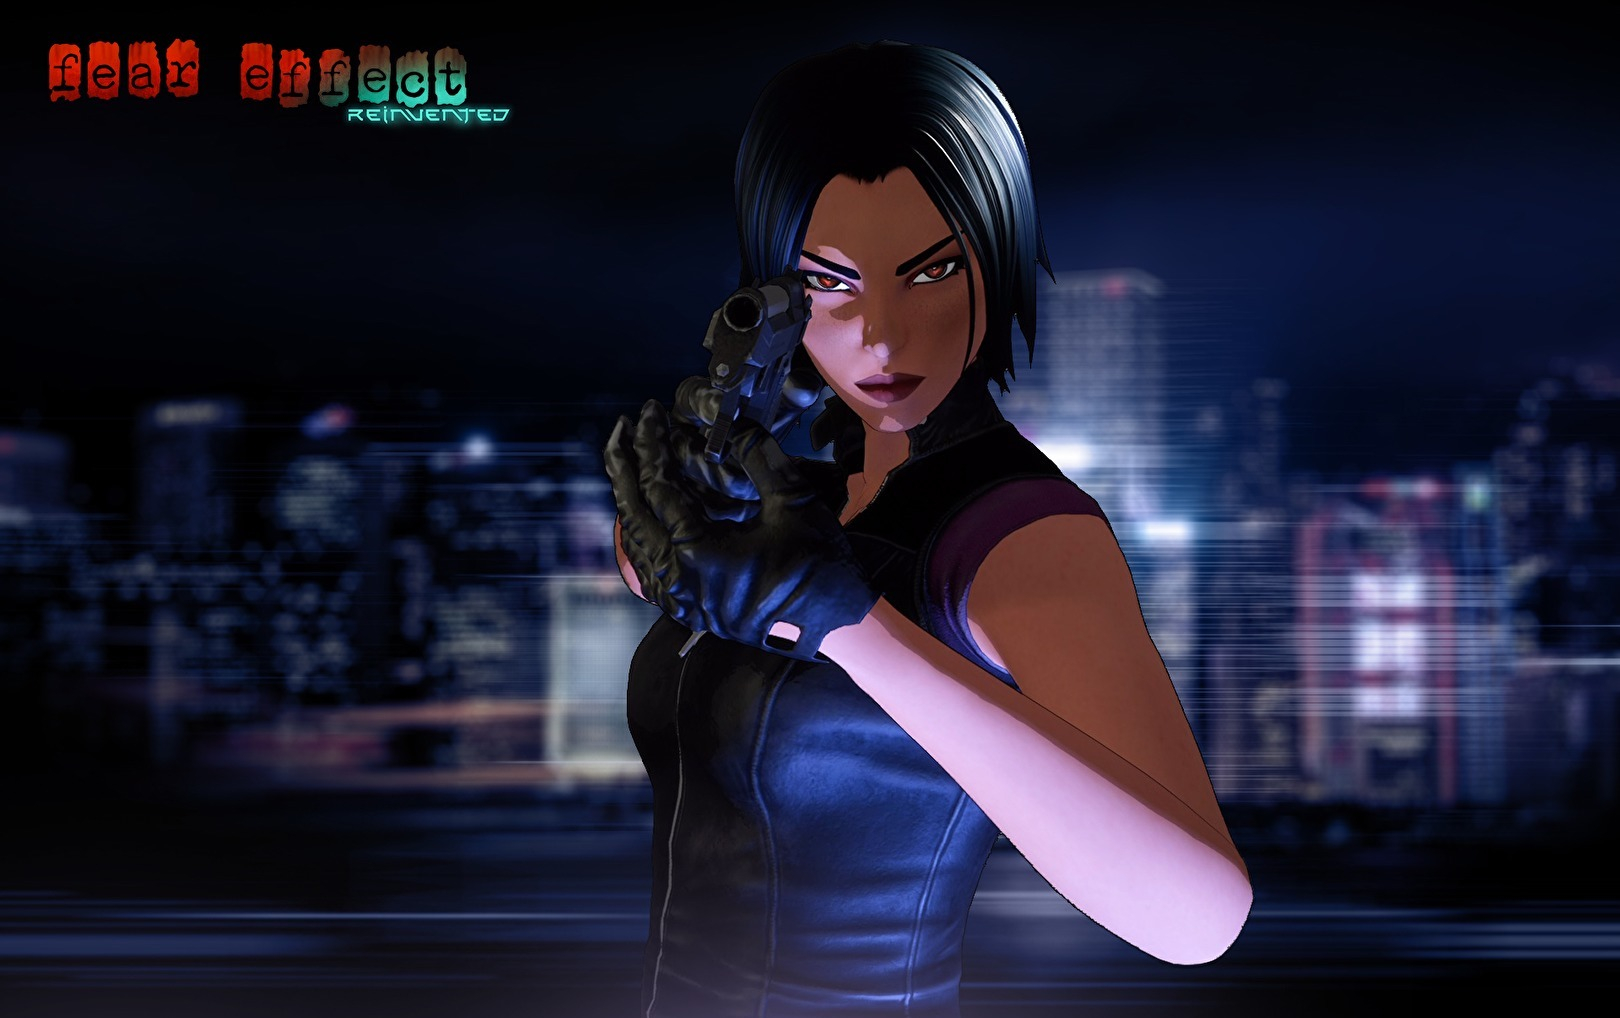 Two Fear Effect titles are coming and they won't be PlayStation exclusives this time